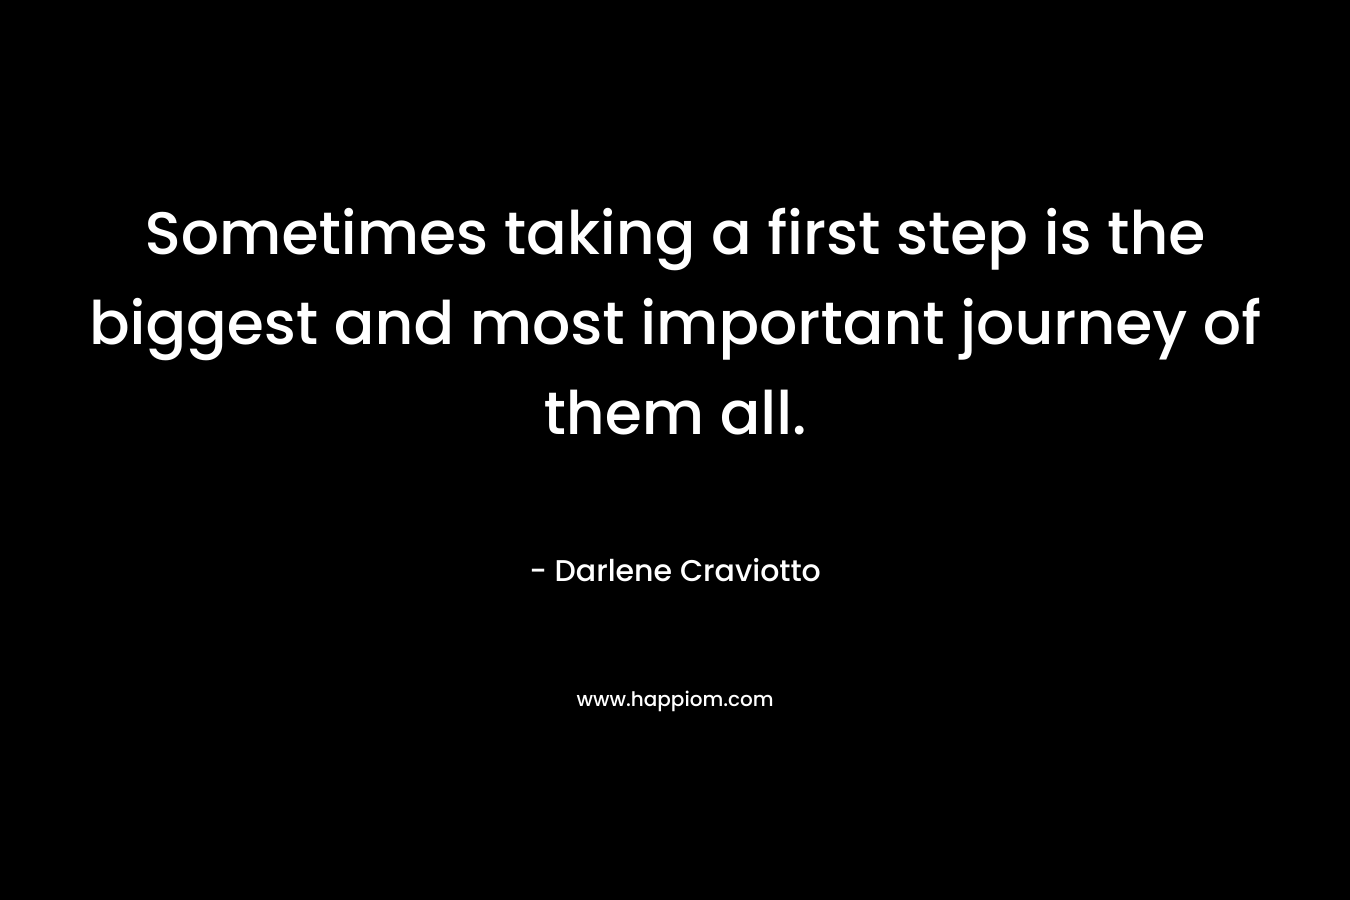 Sometimes taking a first step is the biggest and most important journey of them all. – Darlene Craviotto